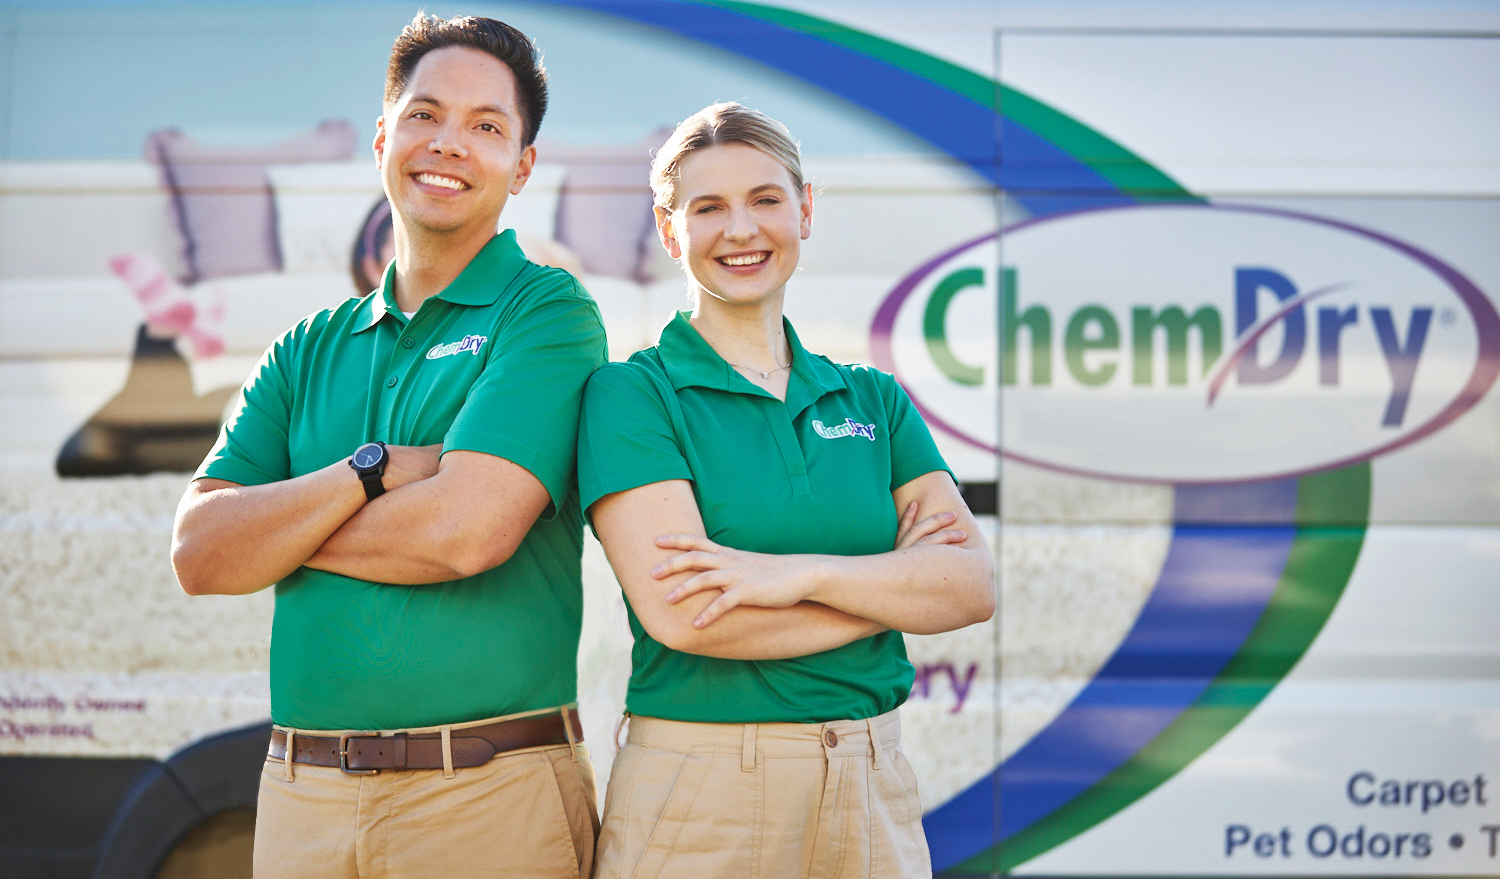 Hampton's Chem-Dry's technicians are prepared to serve our Quincy homes